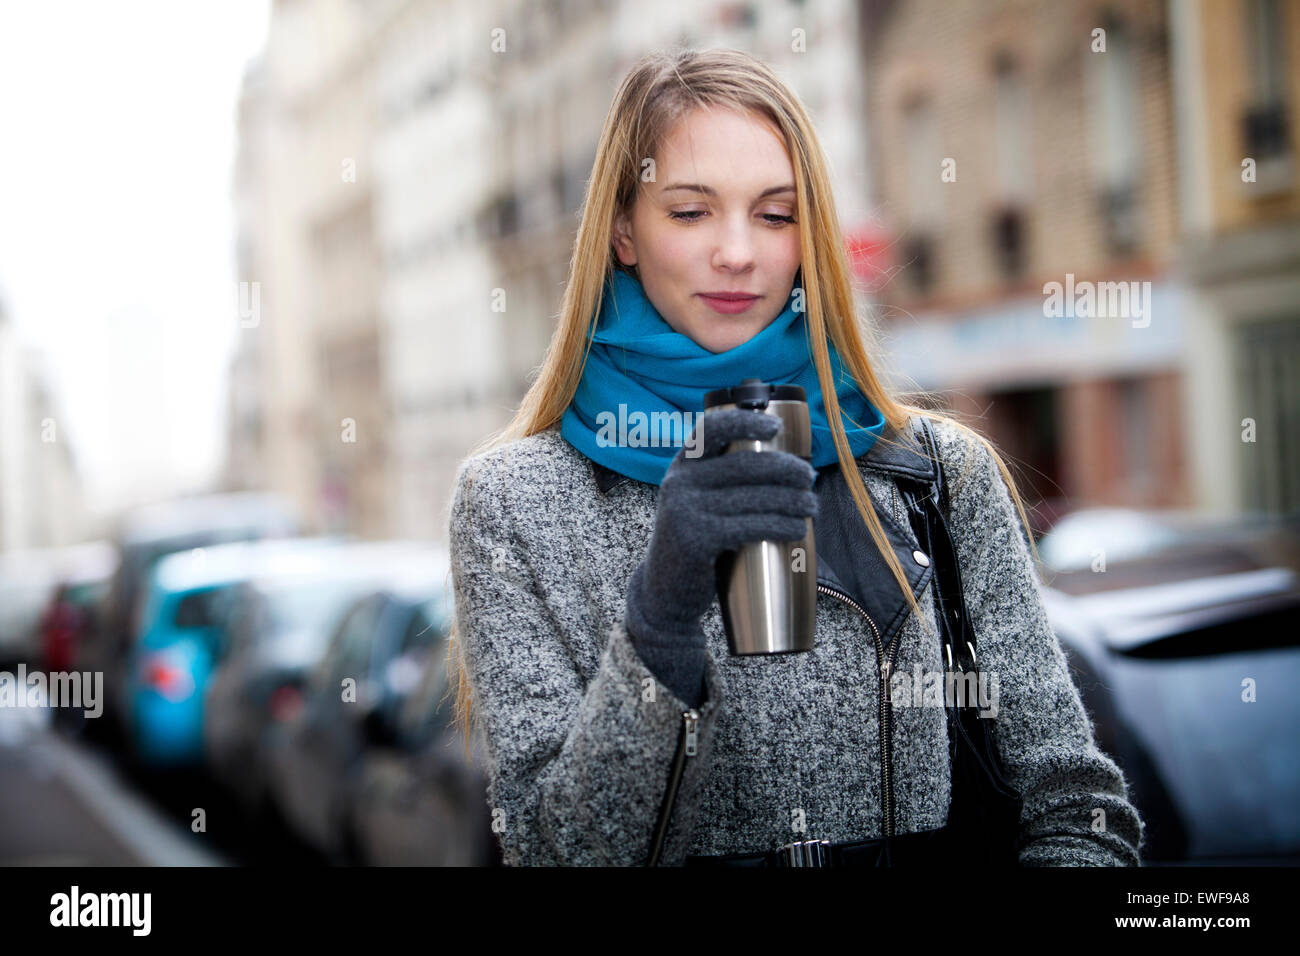 WOMAN WITH HOT DRINK Stock Photo